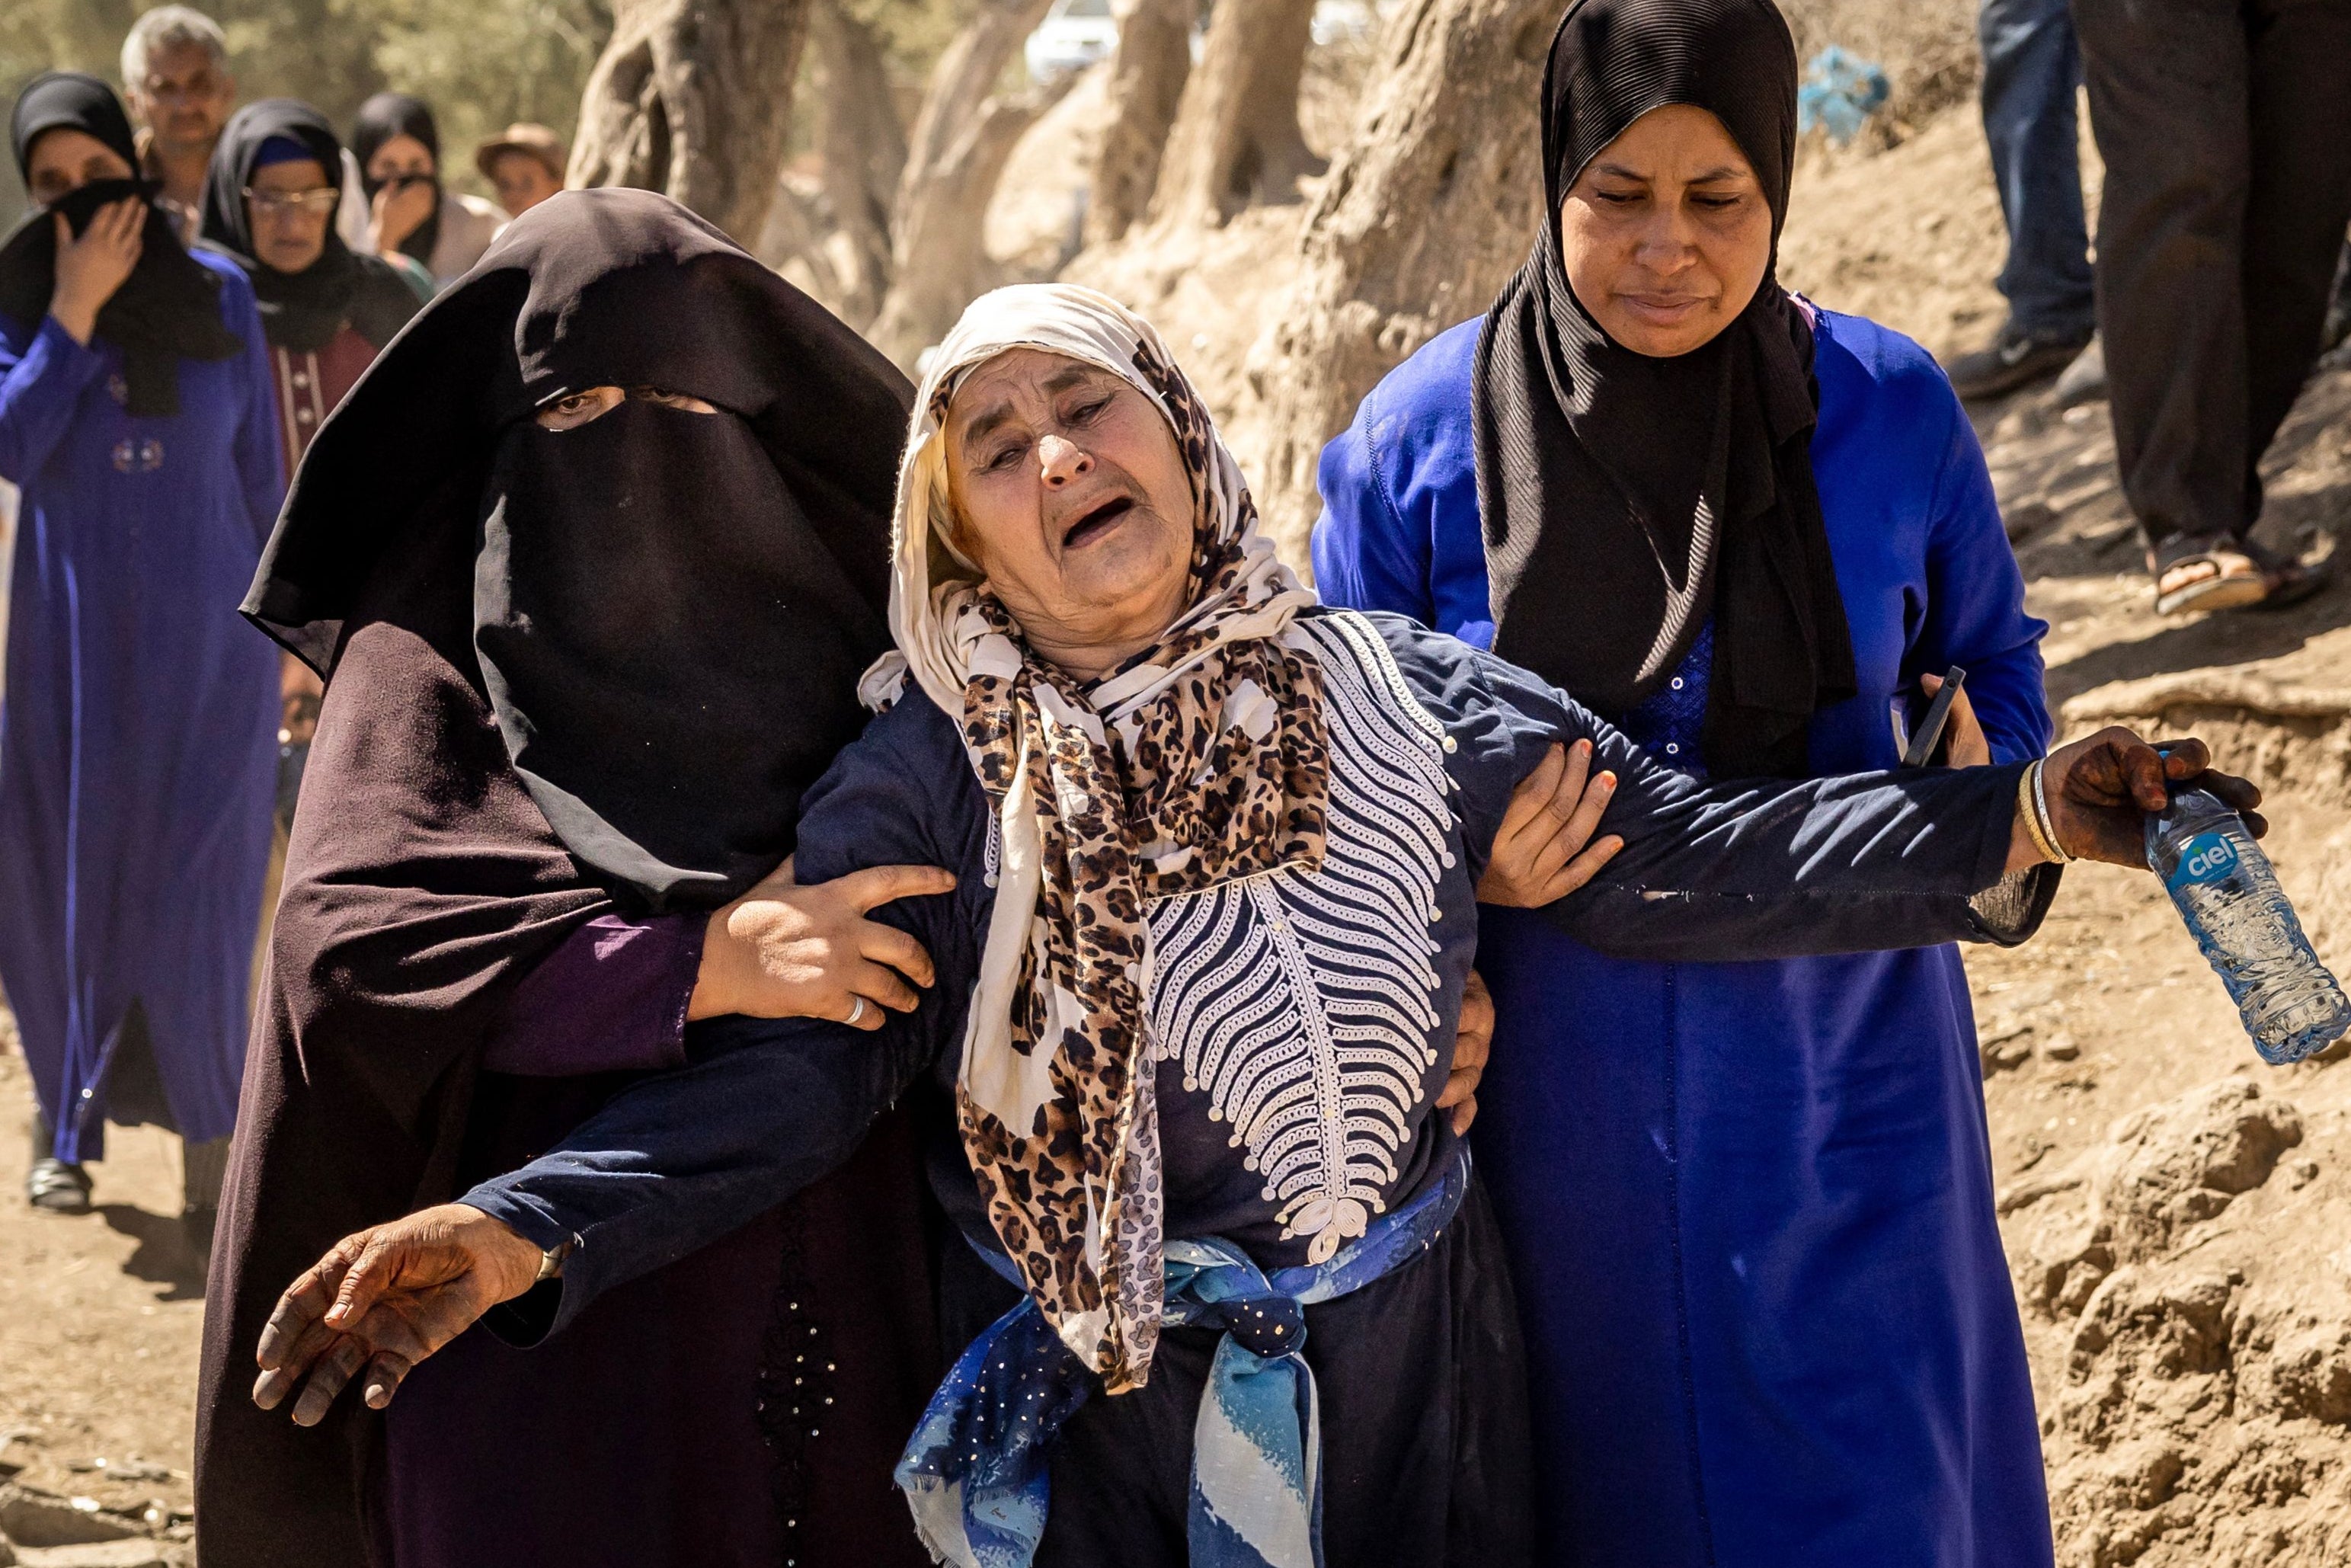 A woman is helped as she reacts to the death of relatives in the mountain village of Tafeghaghte, southwest of Marrakech